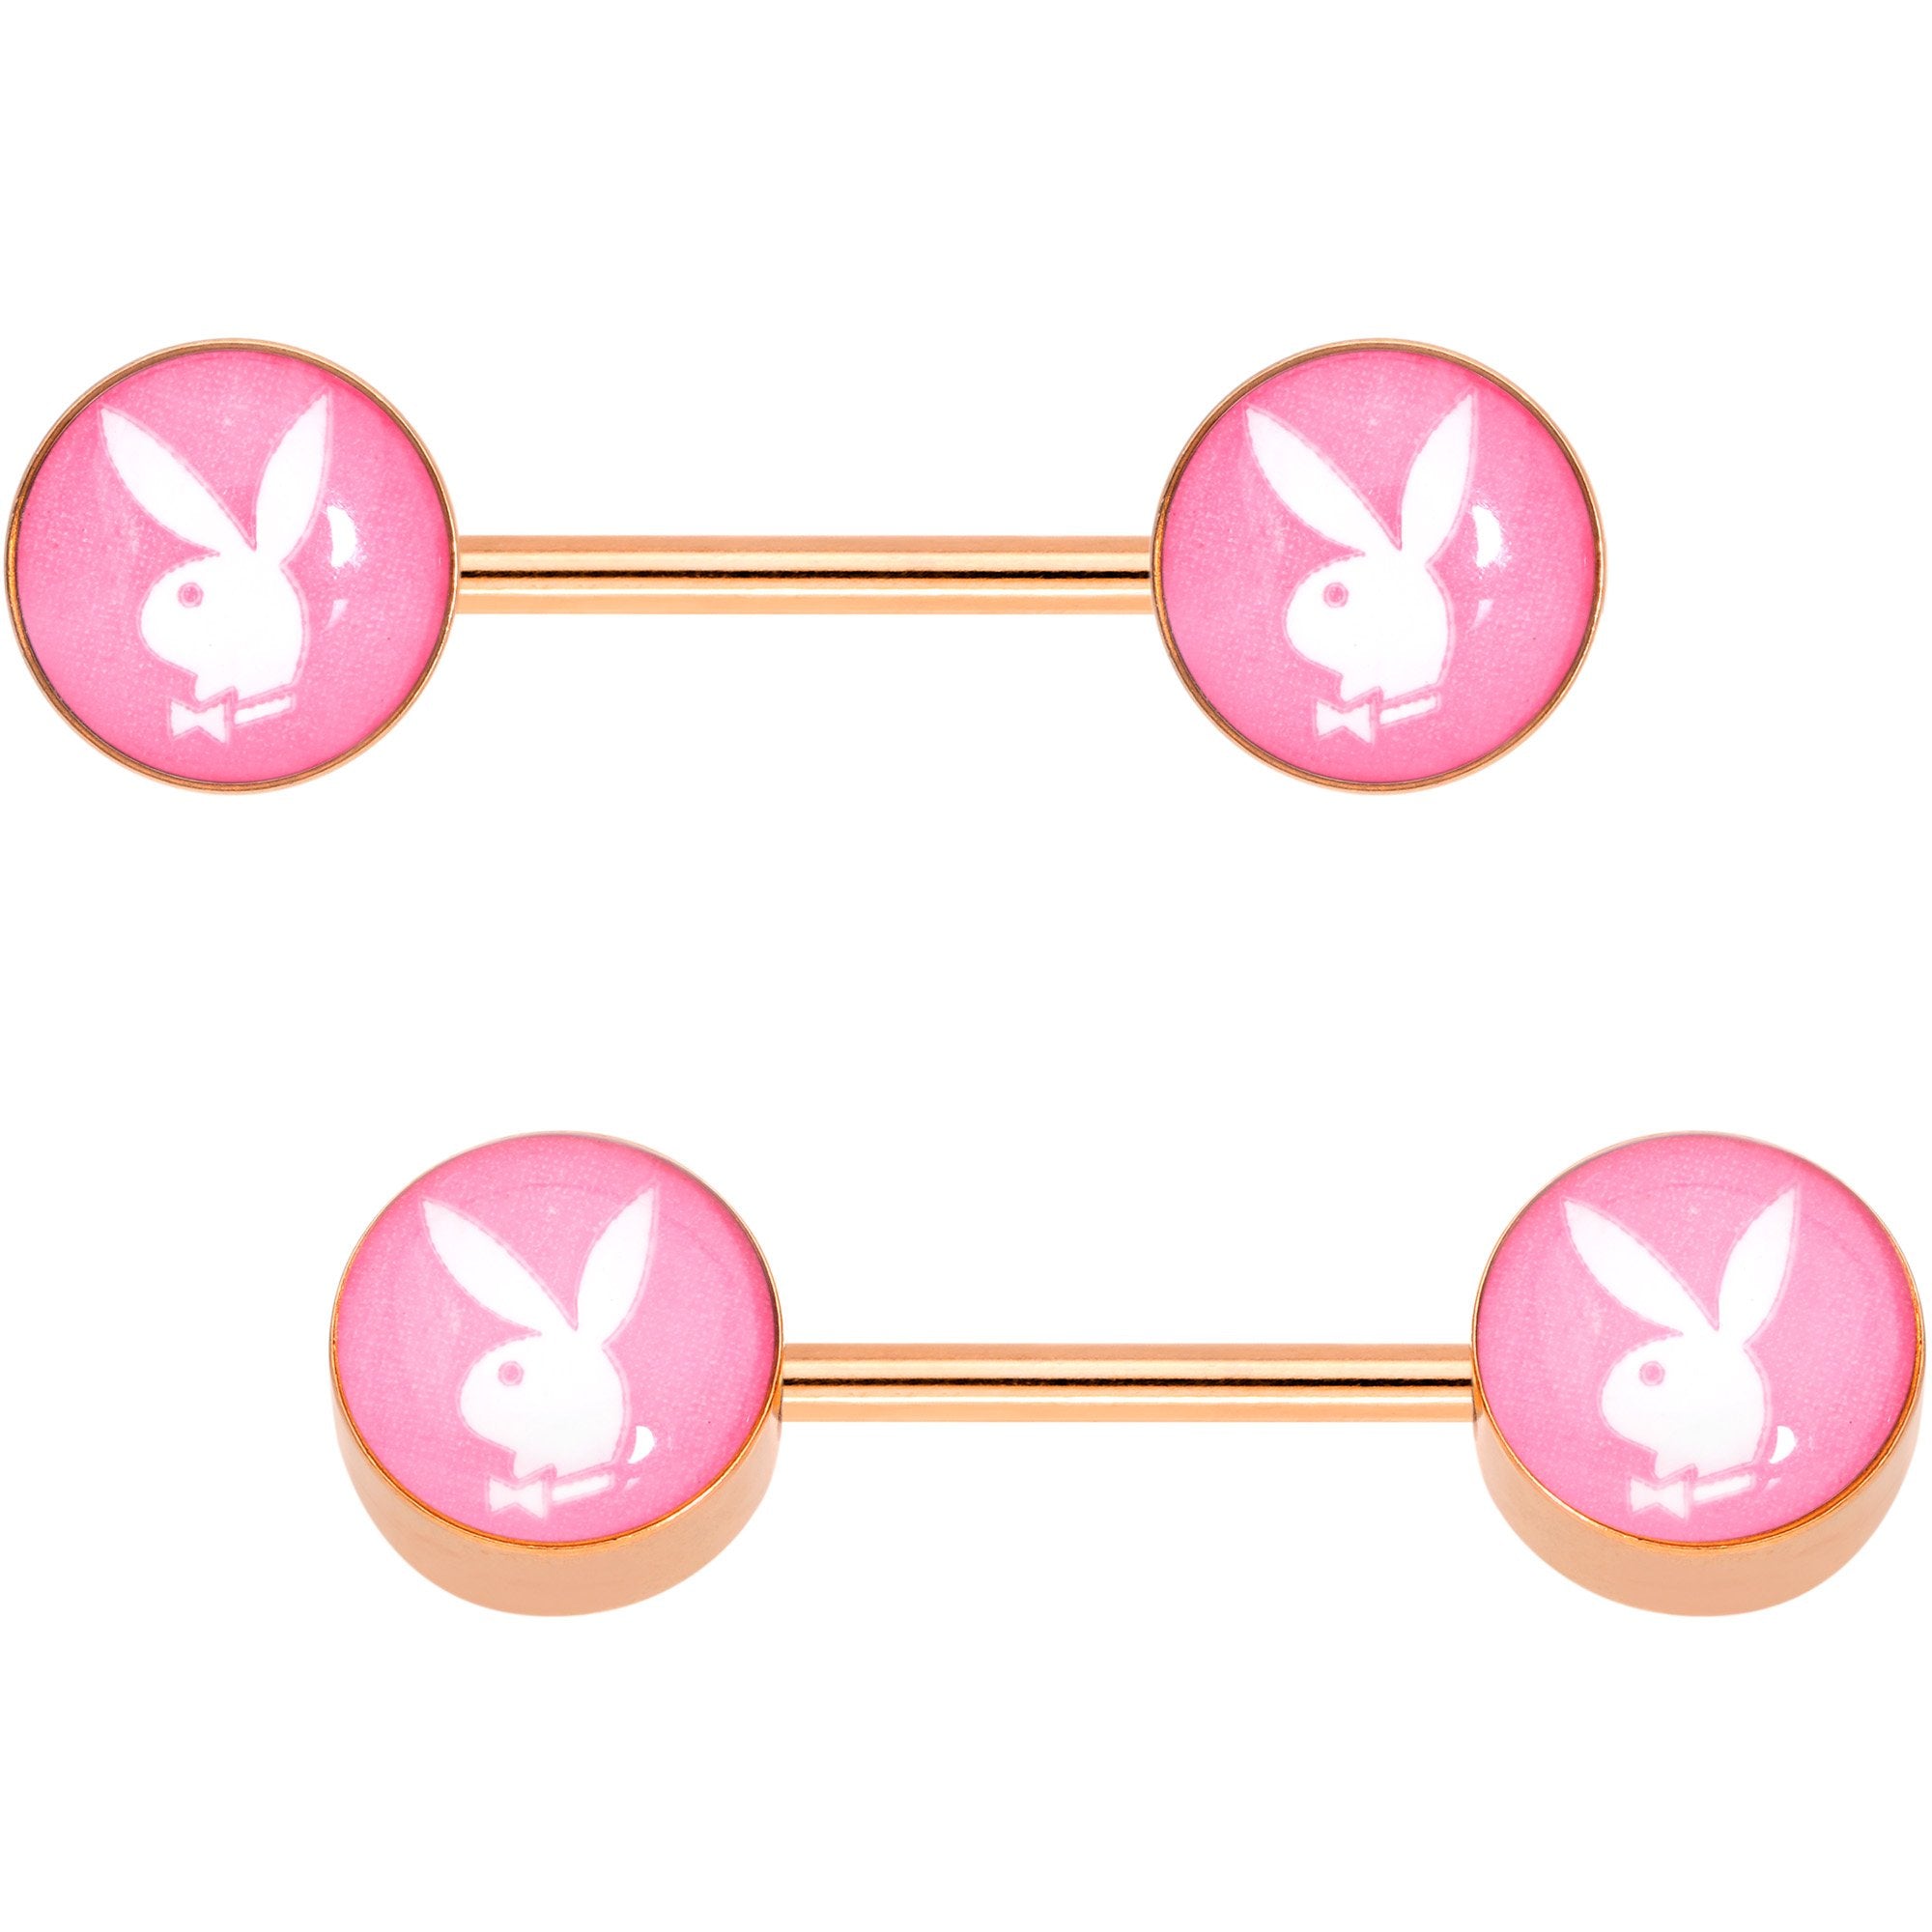 Licensed Pink White Playboy Bunny Gold Tone Barbell Nipple Ring Set